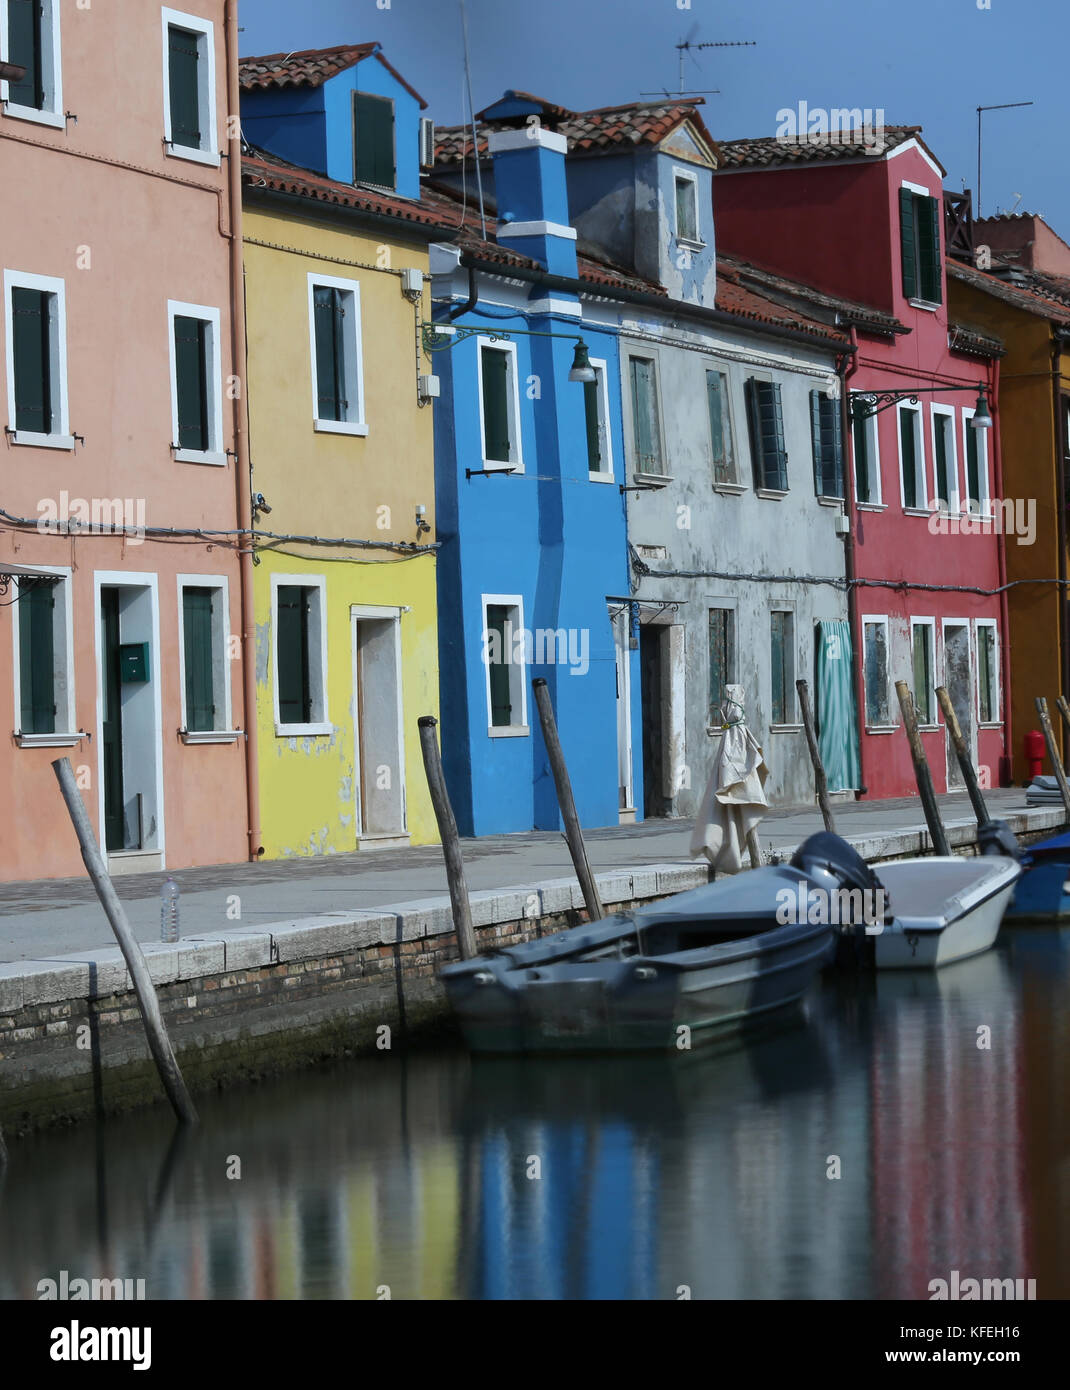 moving boats due to the long exposure time  in Burano near Venice in Italy Stock Photo